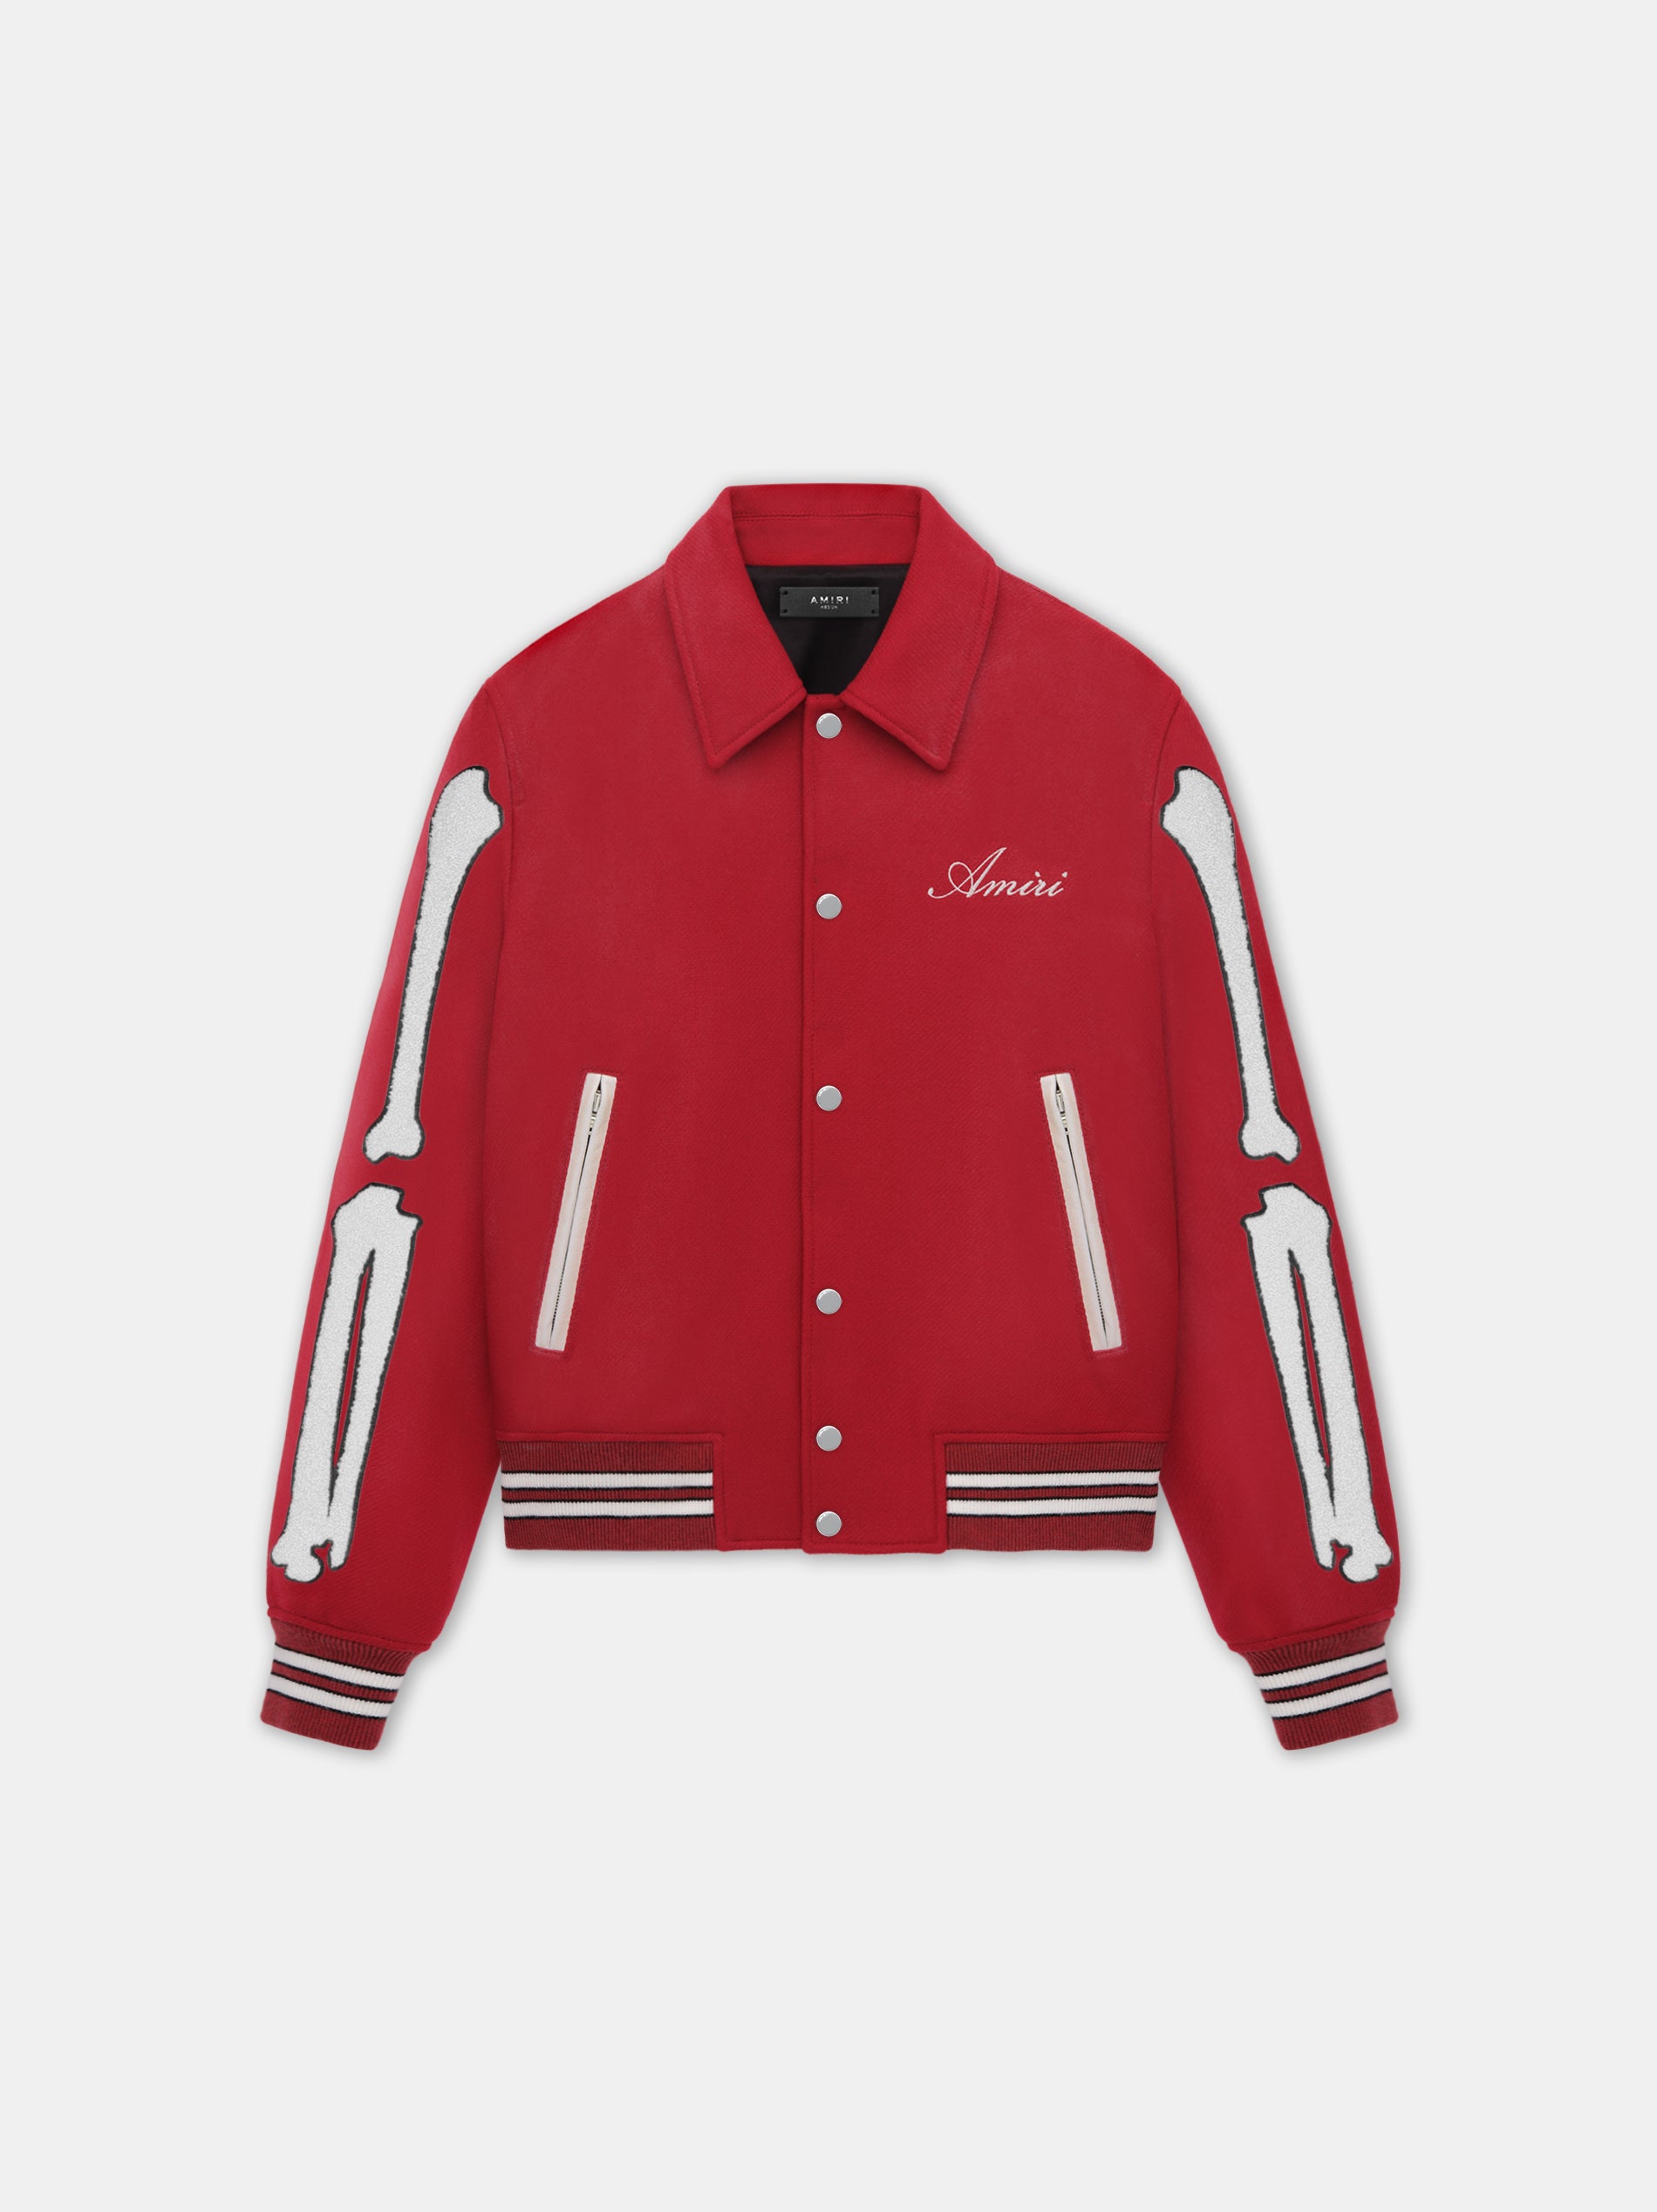 Product BONES JACKET - Red featured image